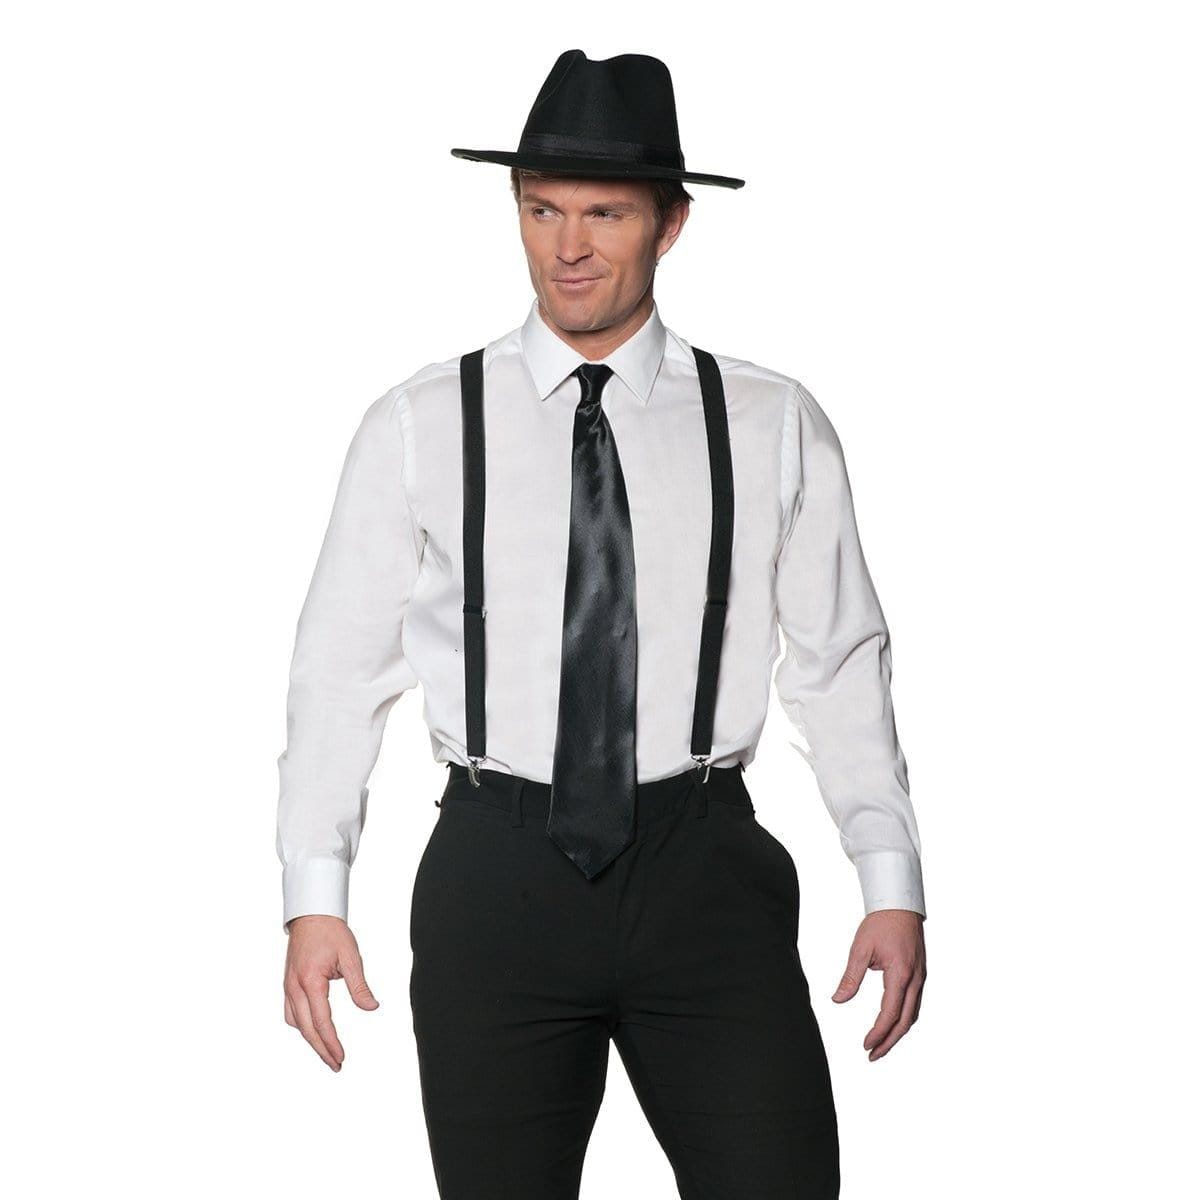 Buy Costume Accessories Gangster Accessory Kit for Adults sold at Party Expert